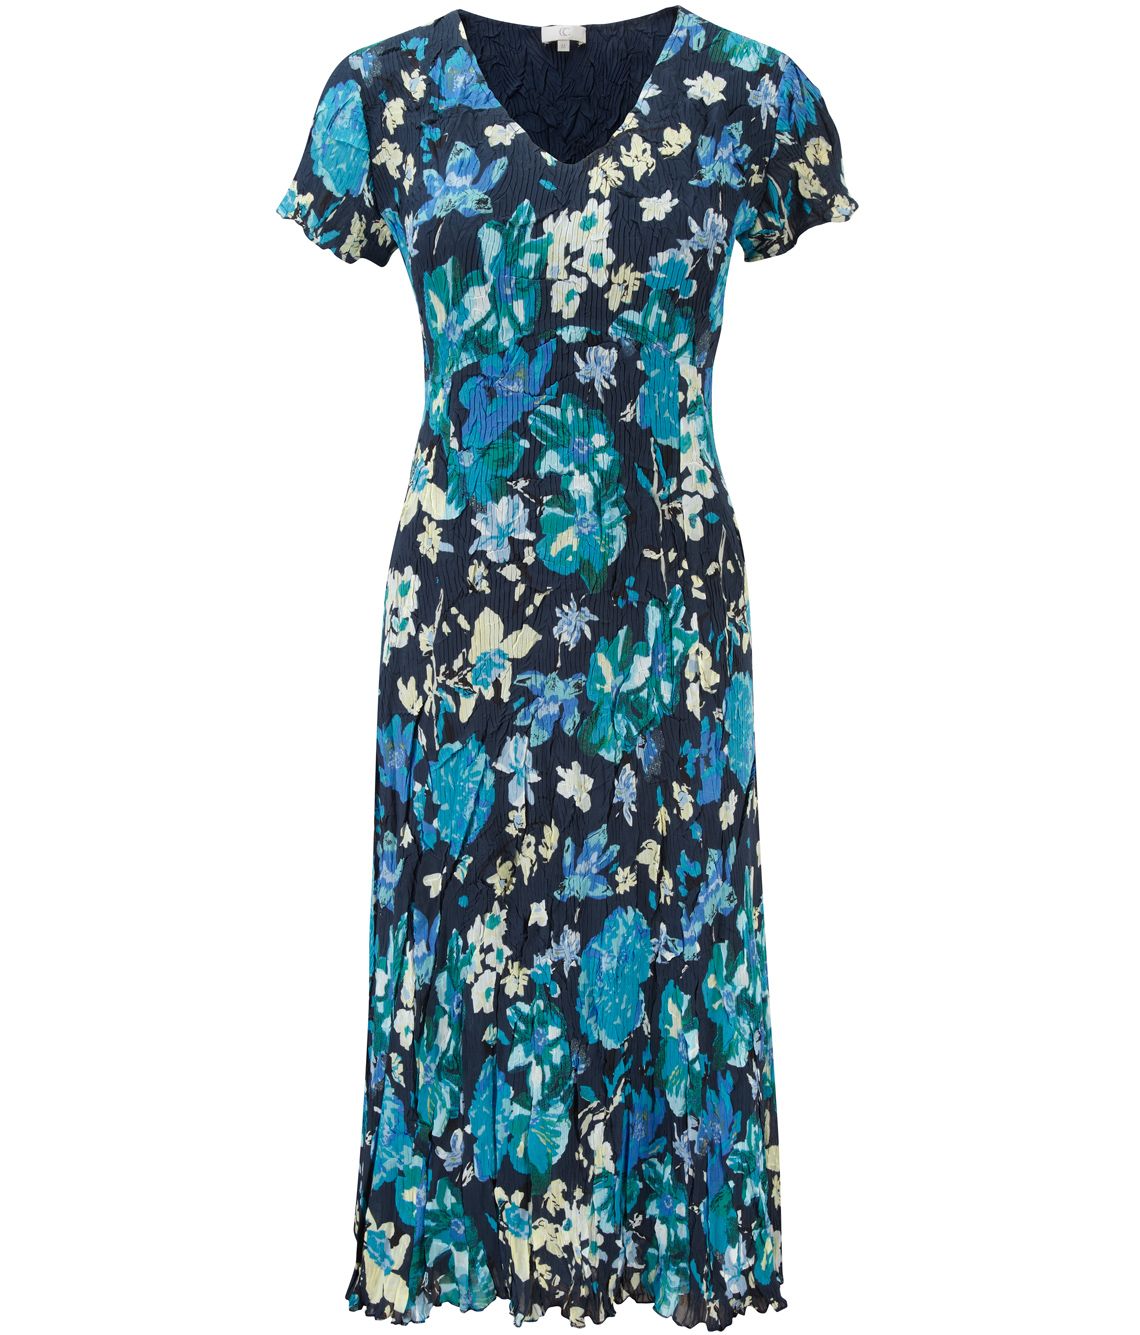 Cc Multicoloured Floral Crinkle Dress in Blue (Multi-Coloured) | Lyst